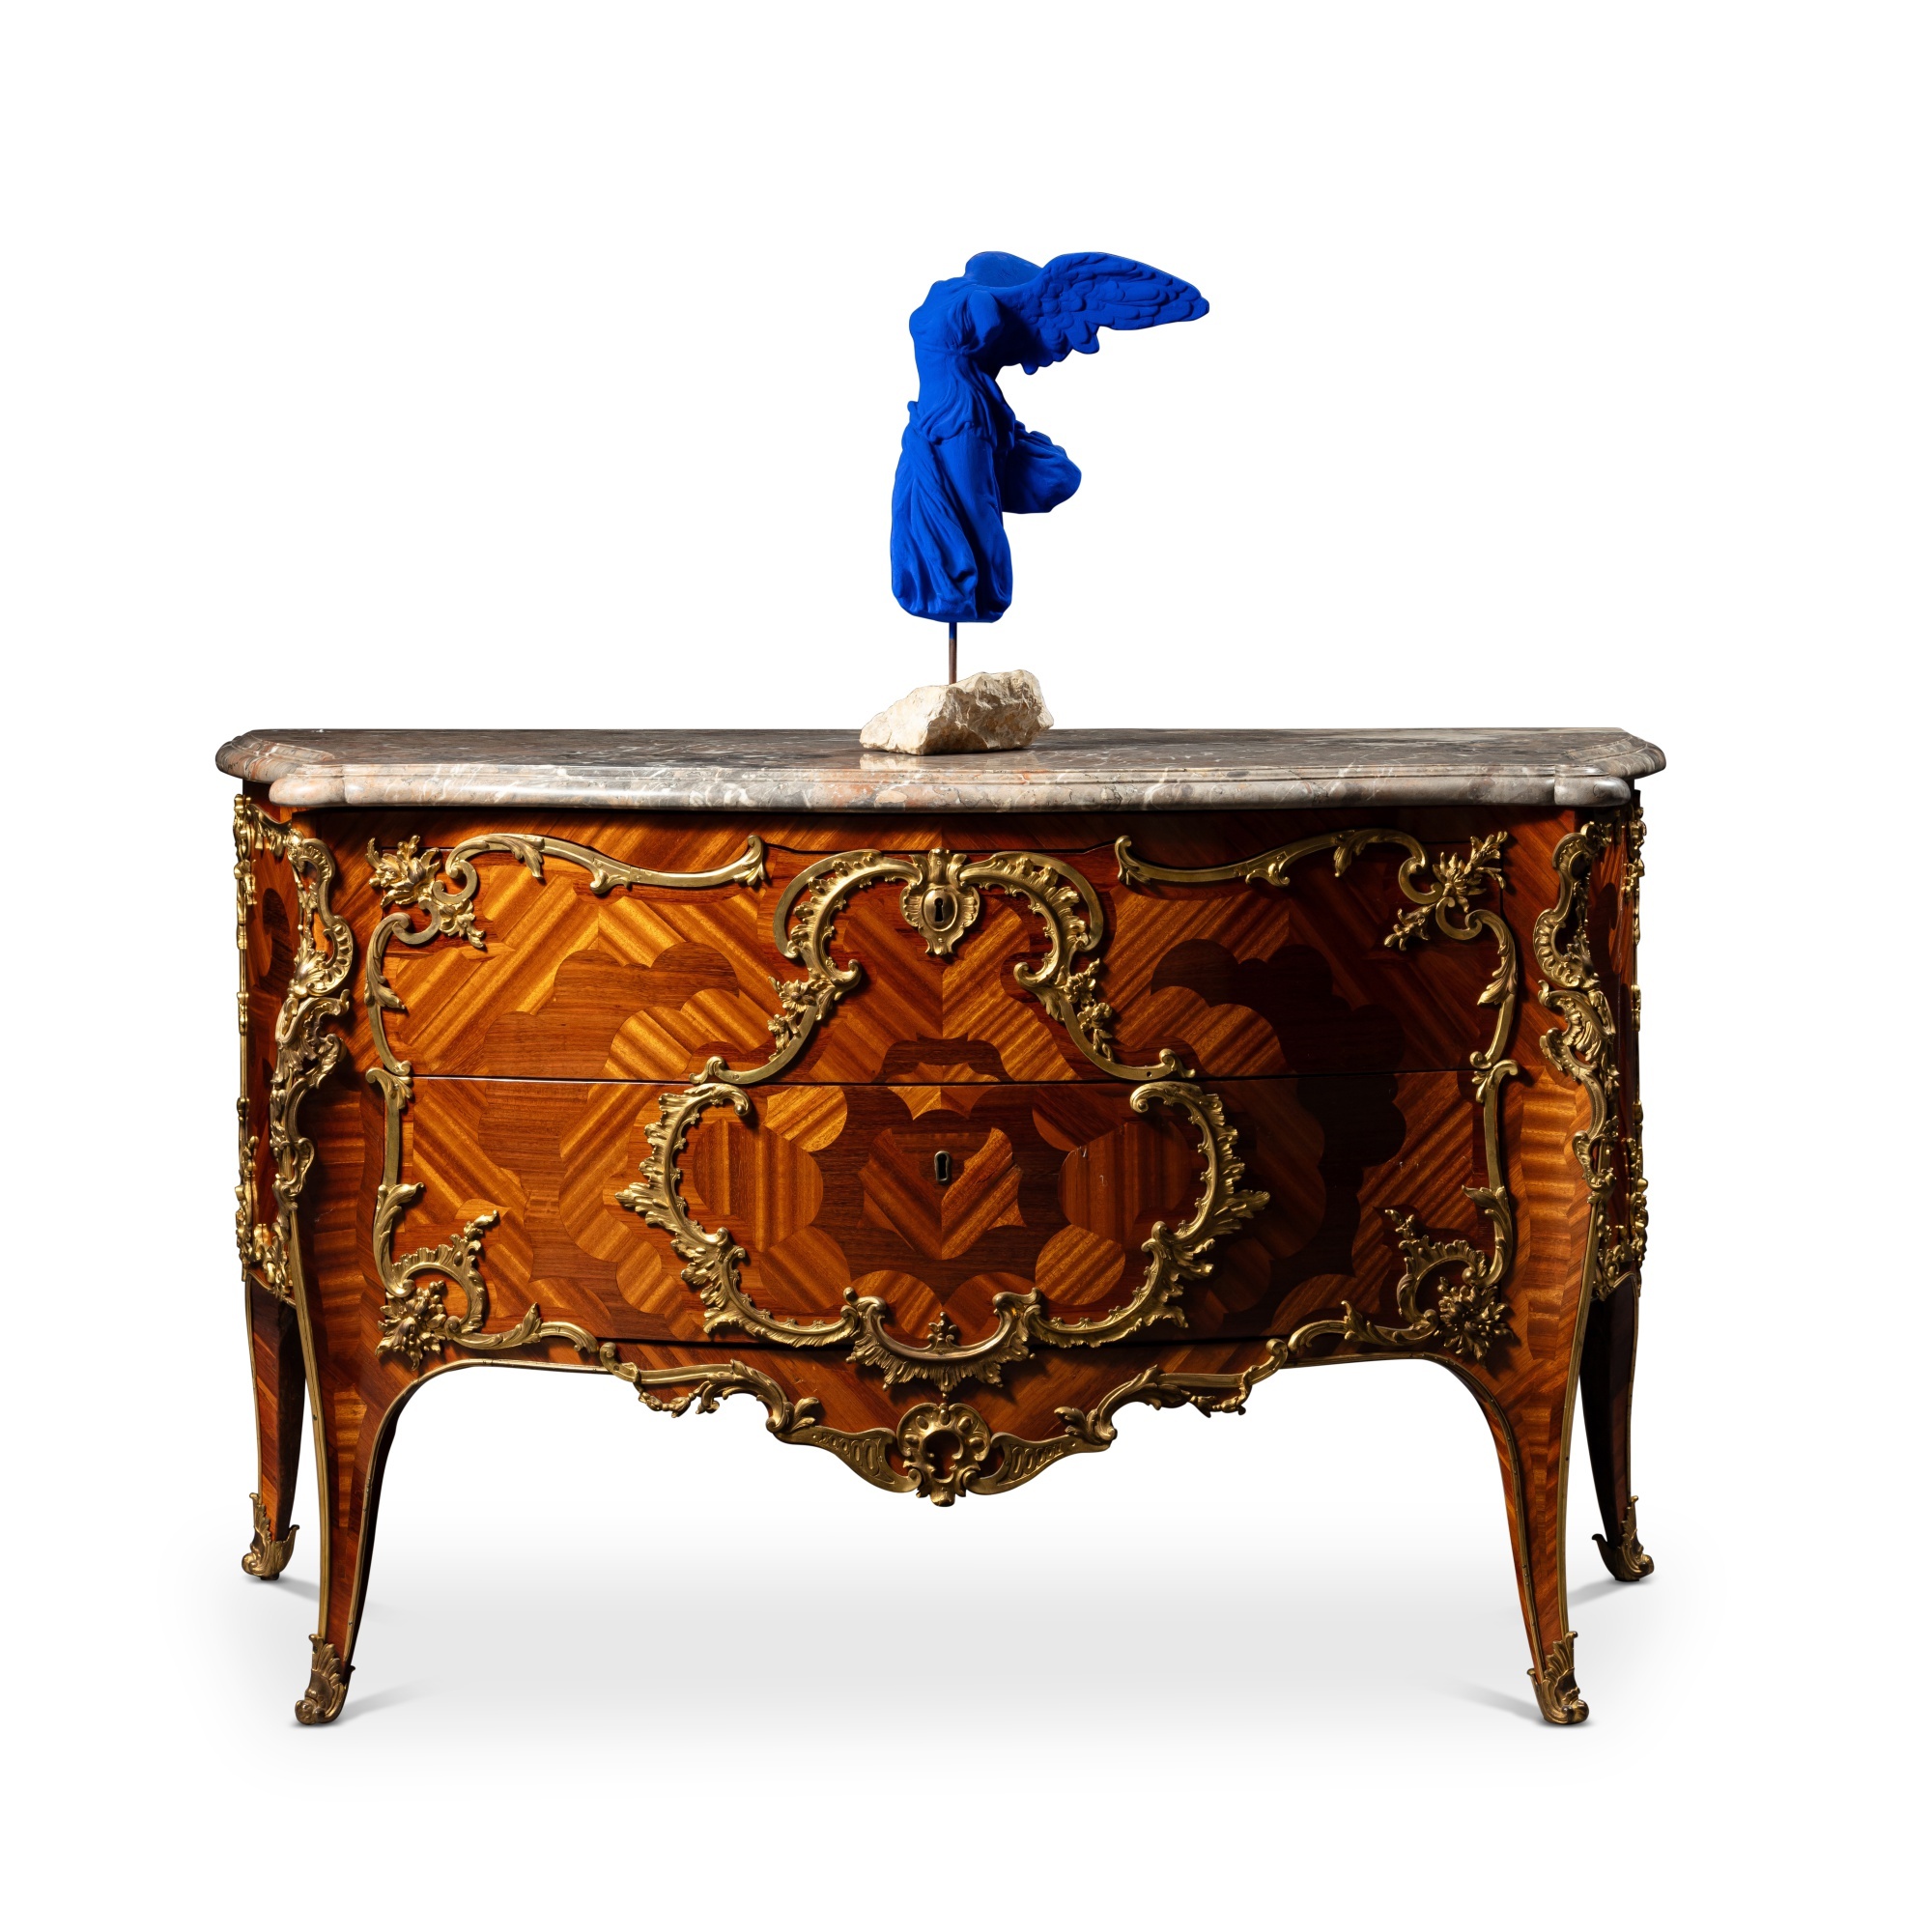 A Louis XV gilt-bronze mounted satinwood and amaranth veneered commode, circa 1750, stamped by BVRB, - Image 9 of 11